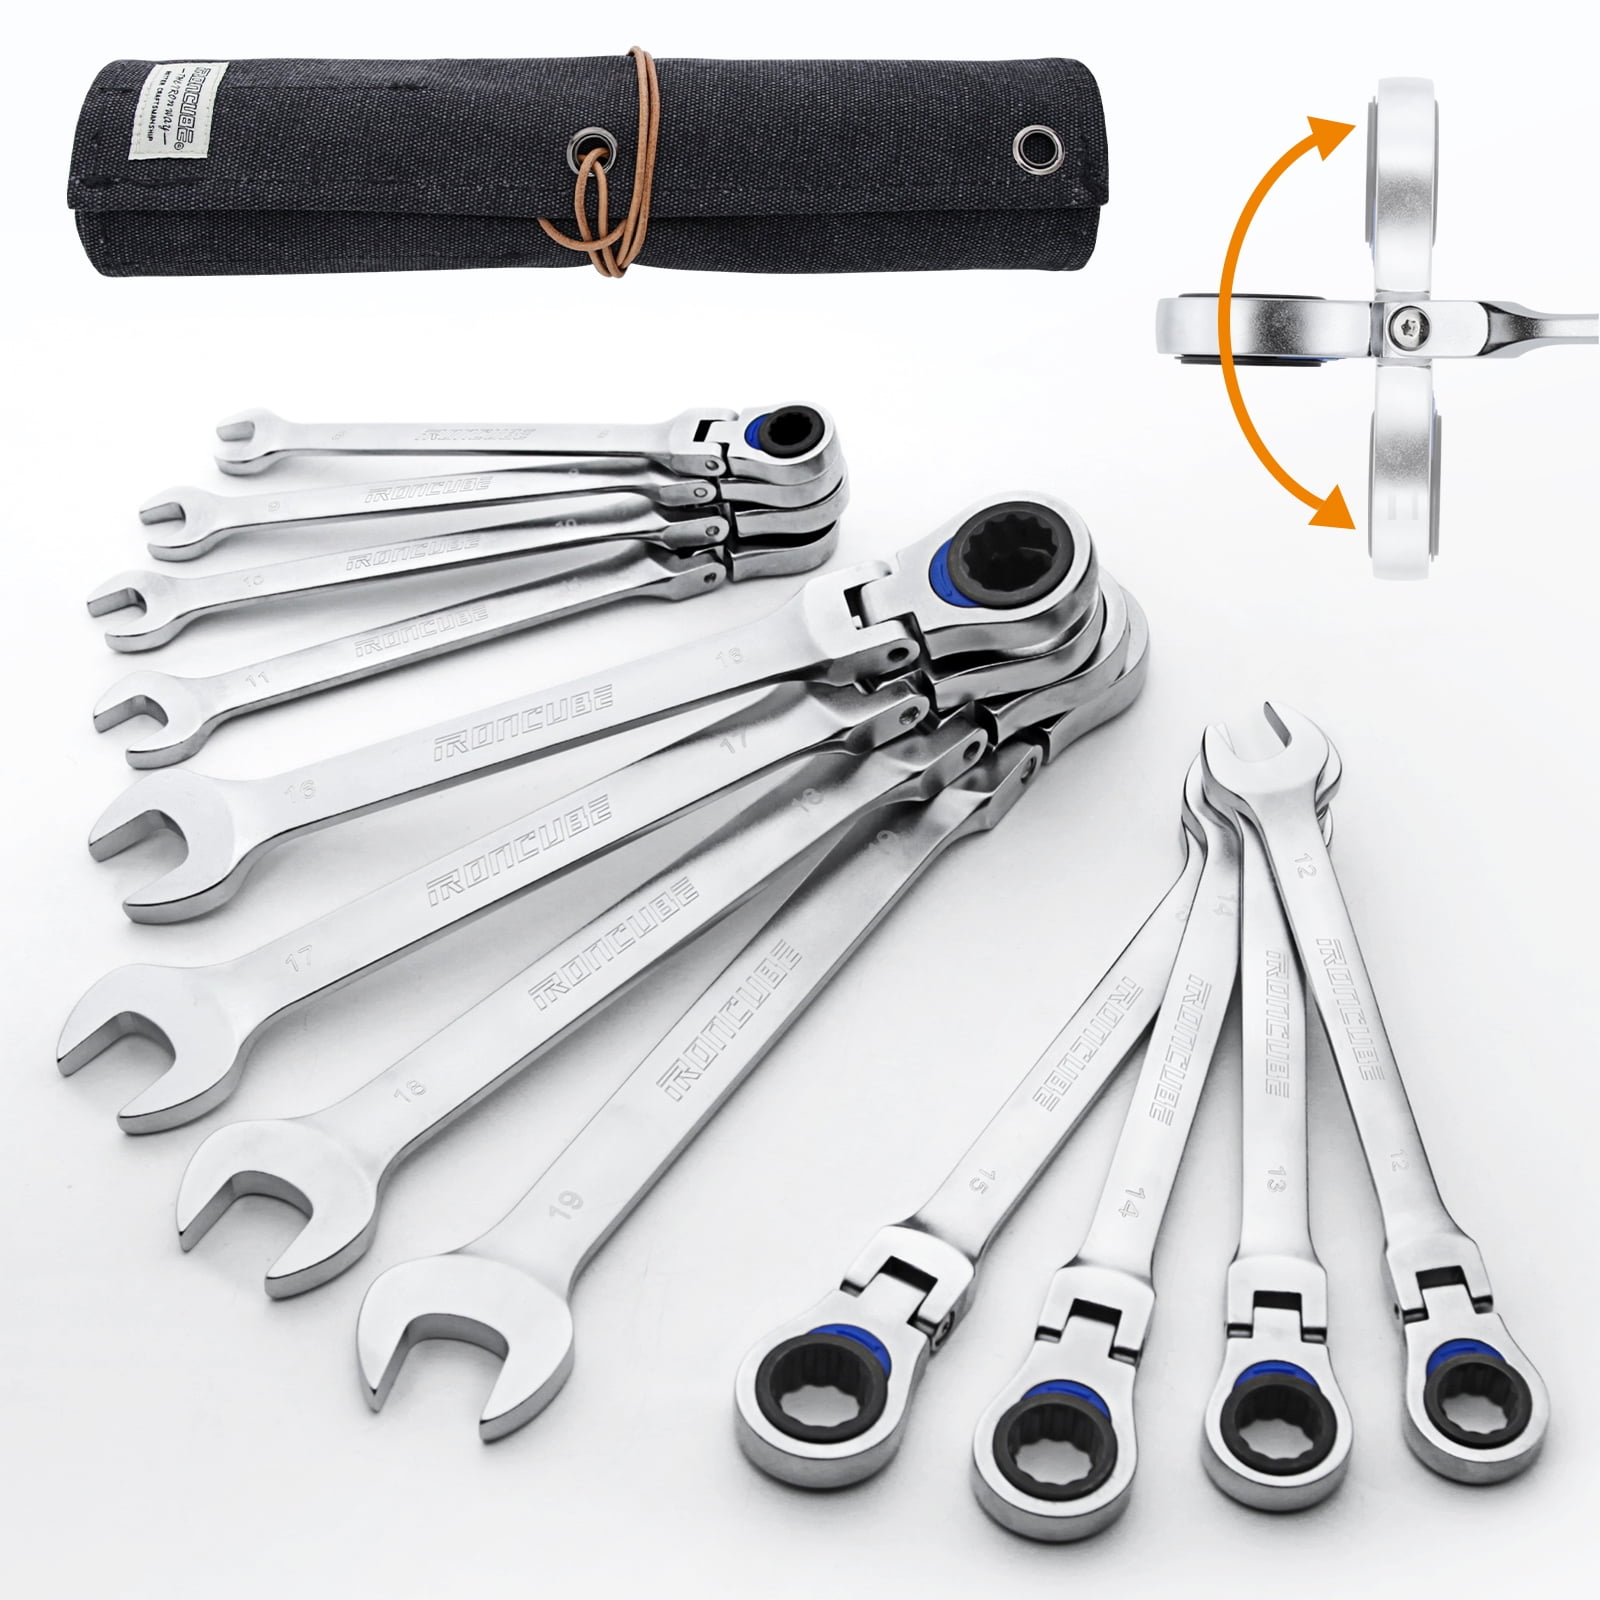 IRONCUBE Flex Head Ratcheting Wrench Set, 12-Piece Reputable Silver, Metric  8-19mm, Black Oxford Fabric Storage Bag for Racing Motorcycle Backup Team's  Maintenance Tools